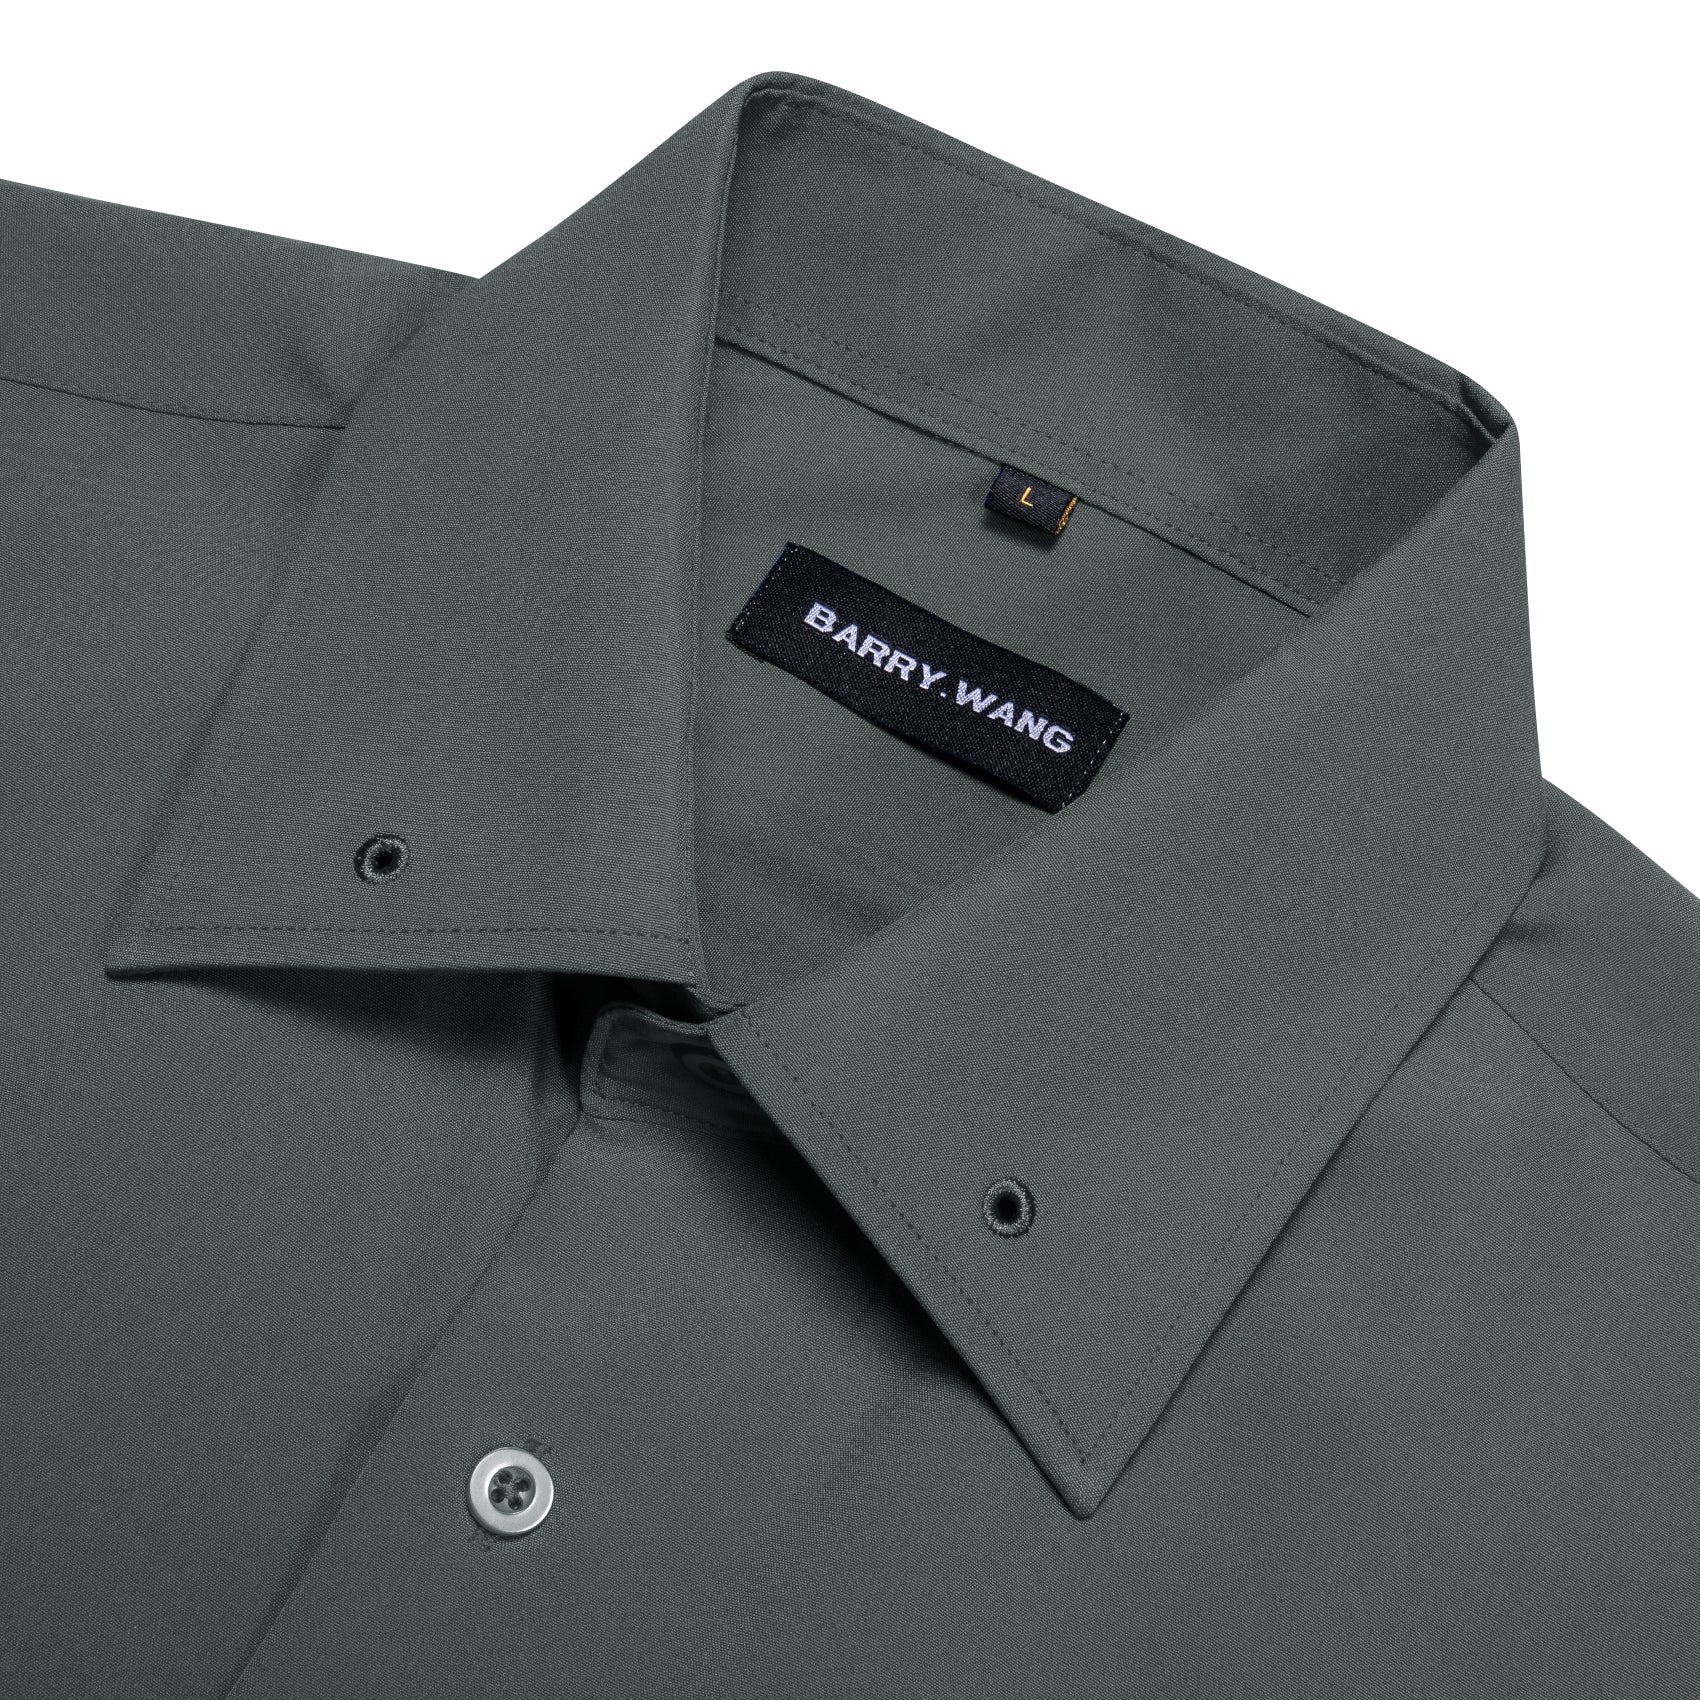 Barry.wang Olive Green Solid Silk Shirt